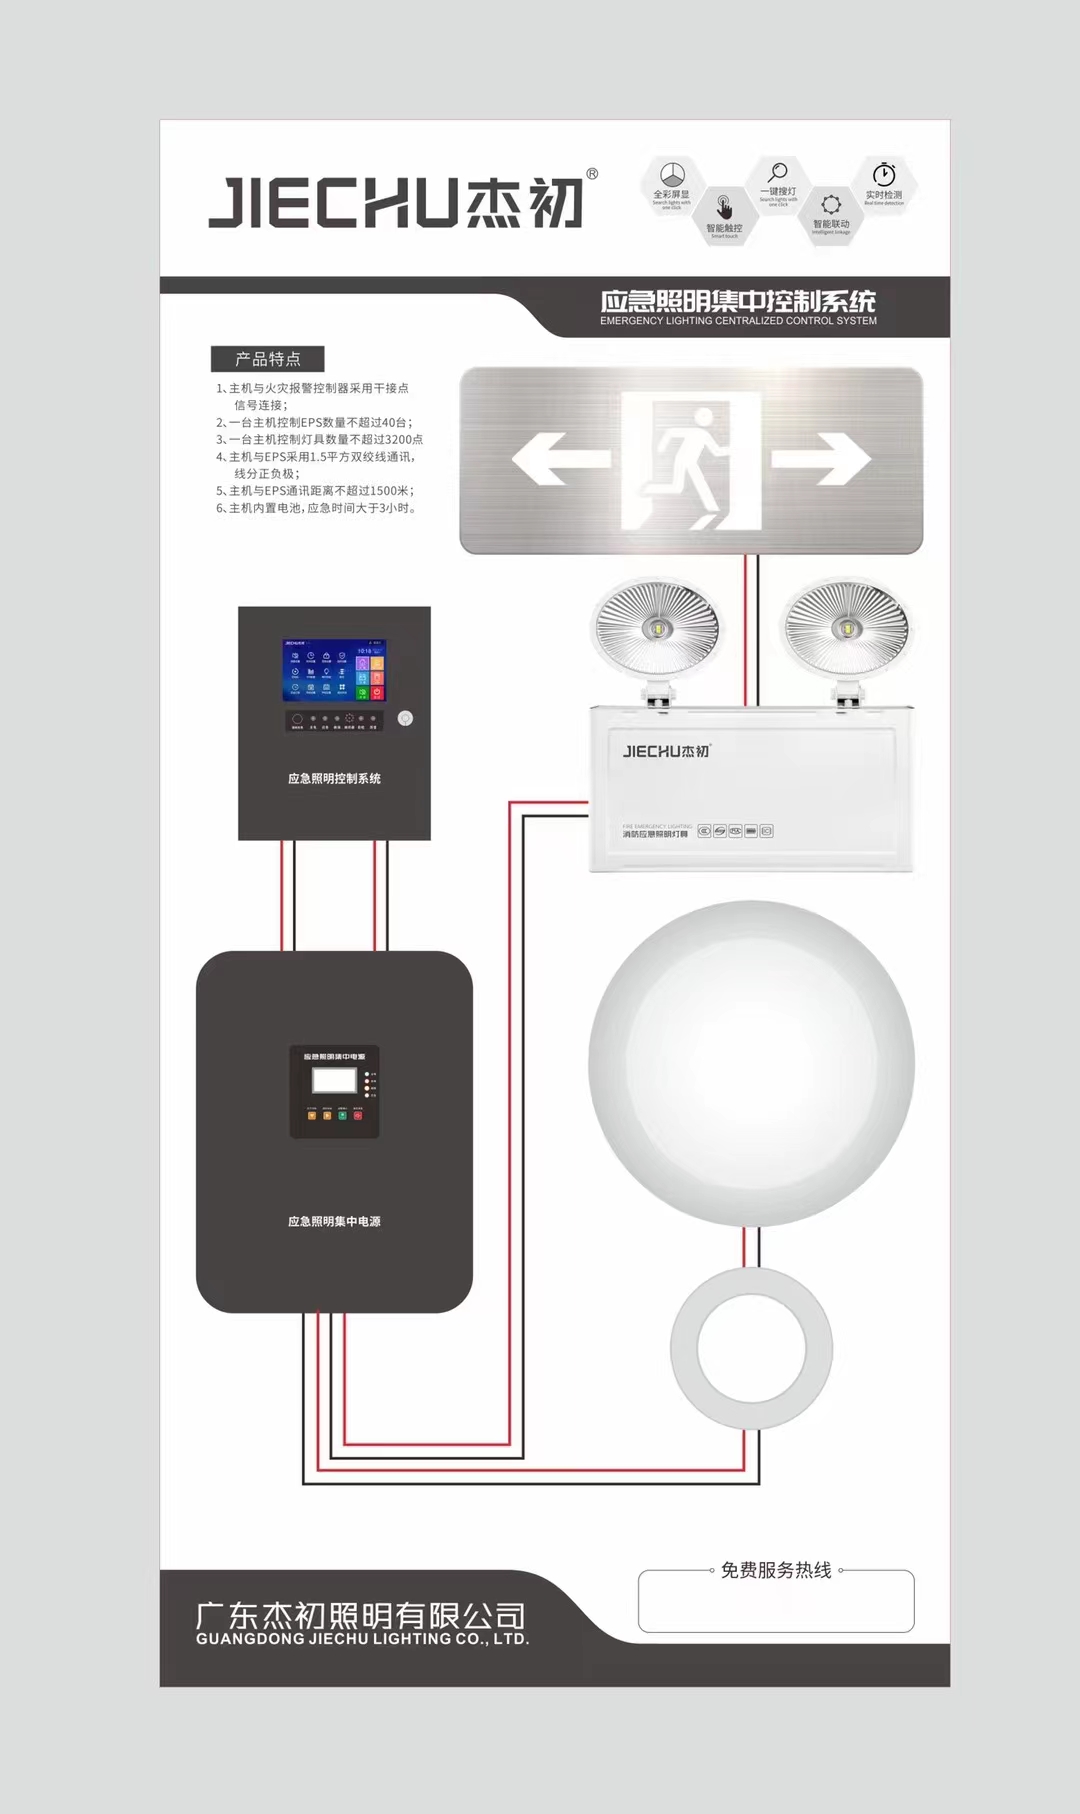 Centralized fire control emergency downlight